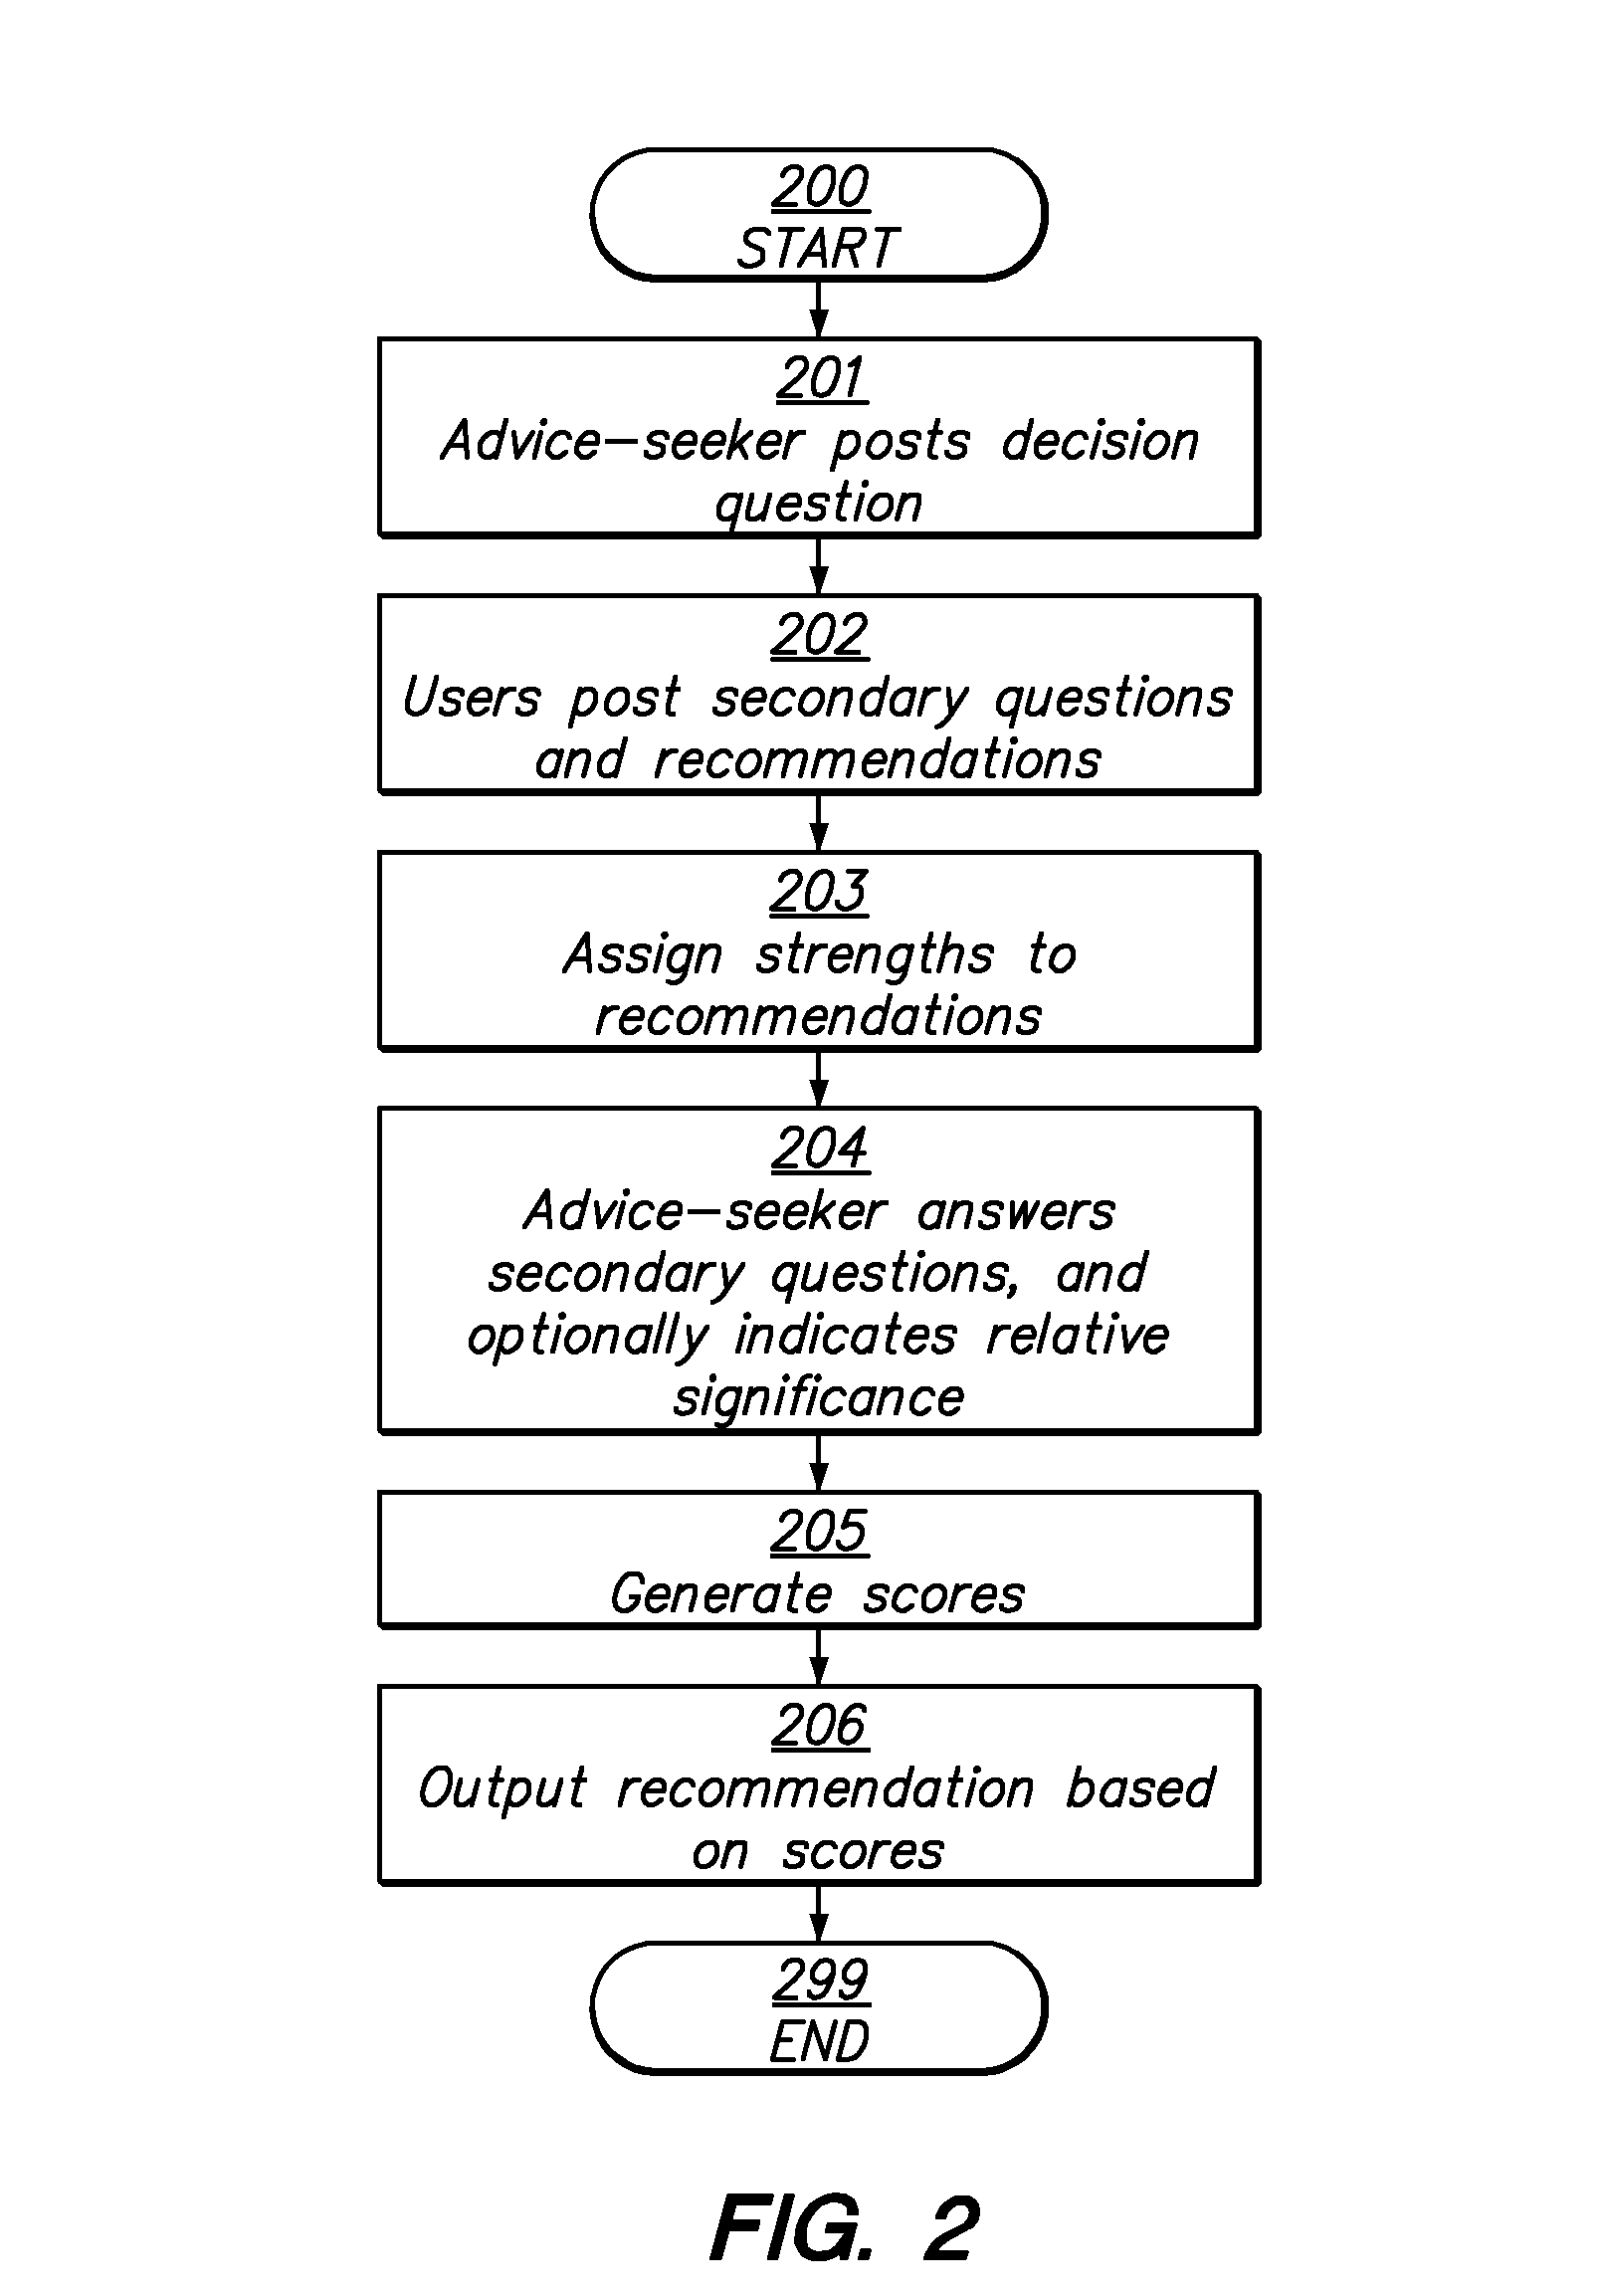 Automated decision-making based on collaborative user input